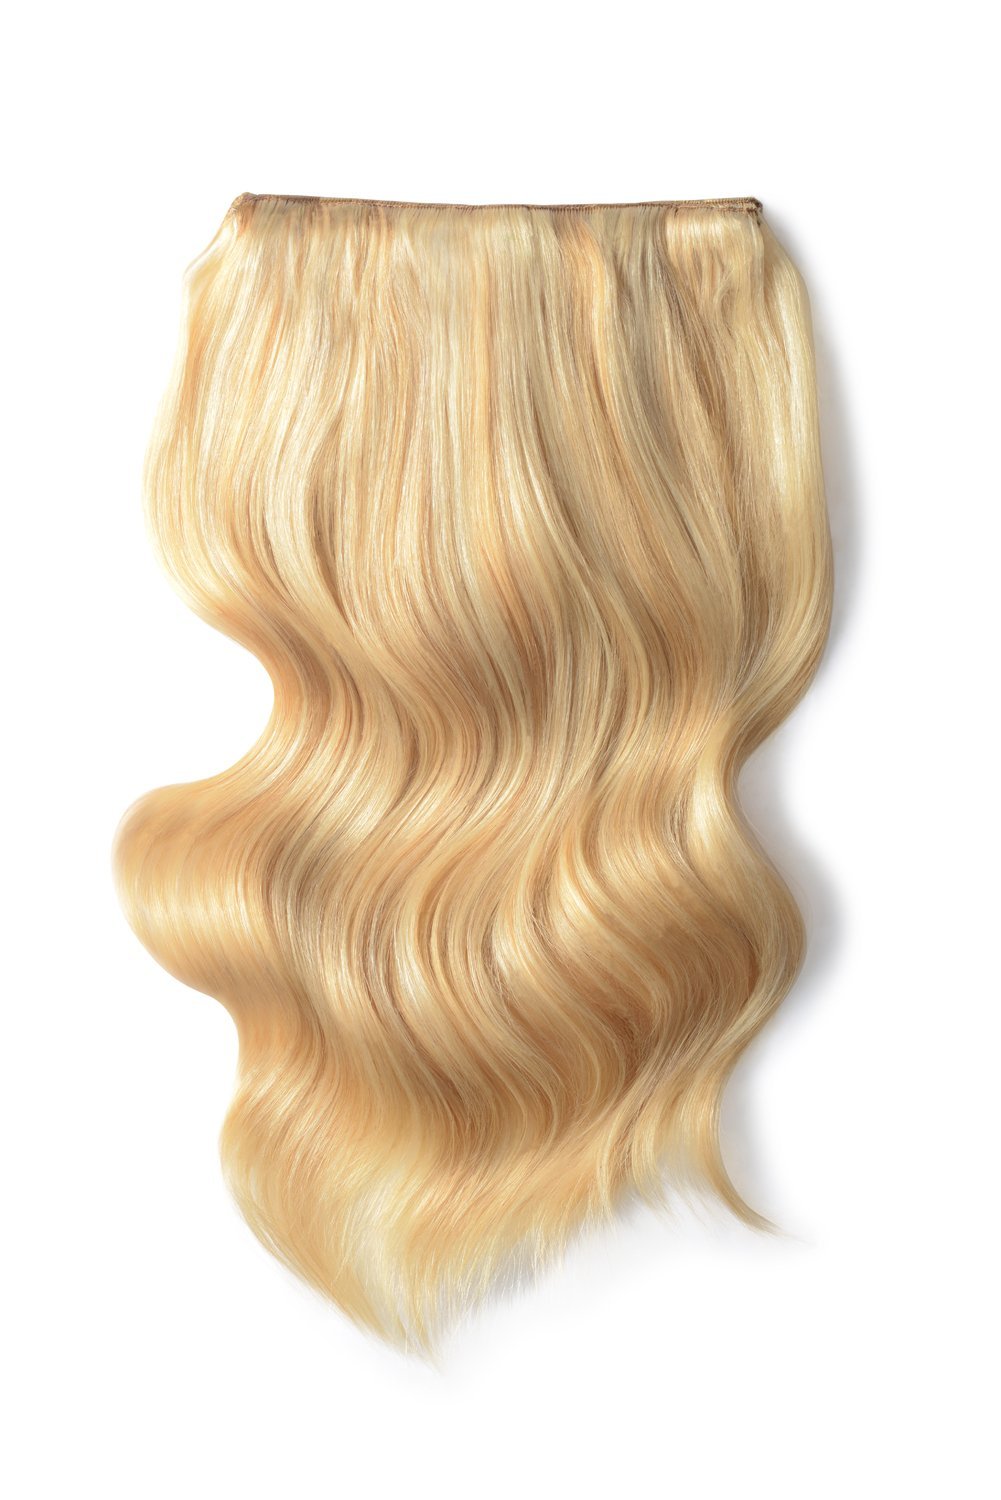 Double Wefted Full Head Remy Clip in Human Hair Extensions - Golden Blonde/Bleach Blonde Mix (#16/613)